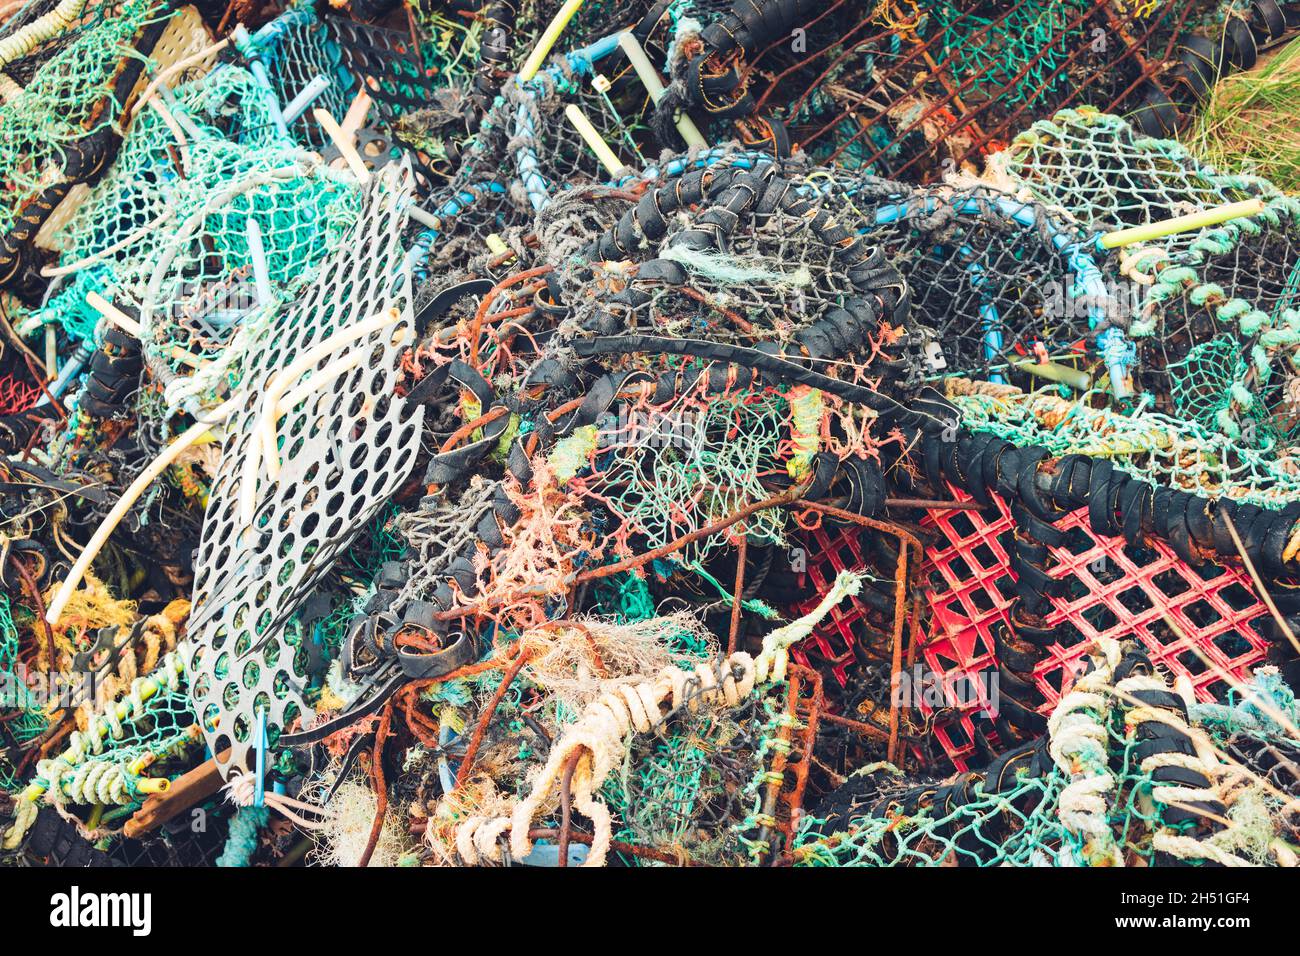 Messy pile of brighly coloured discarded lobster traps and ghost nets - marine debris Stock Photo